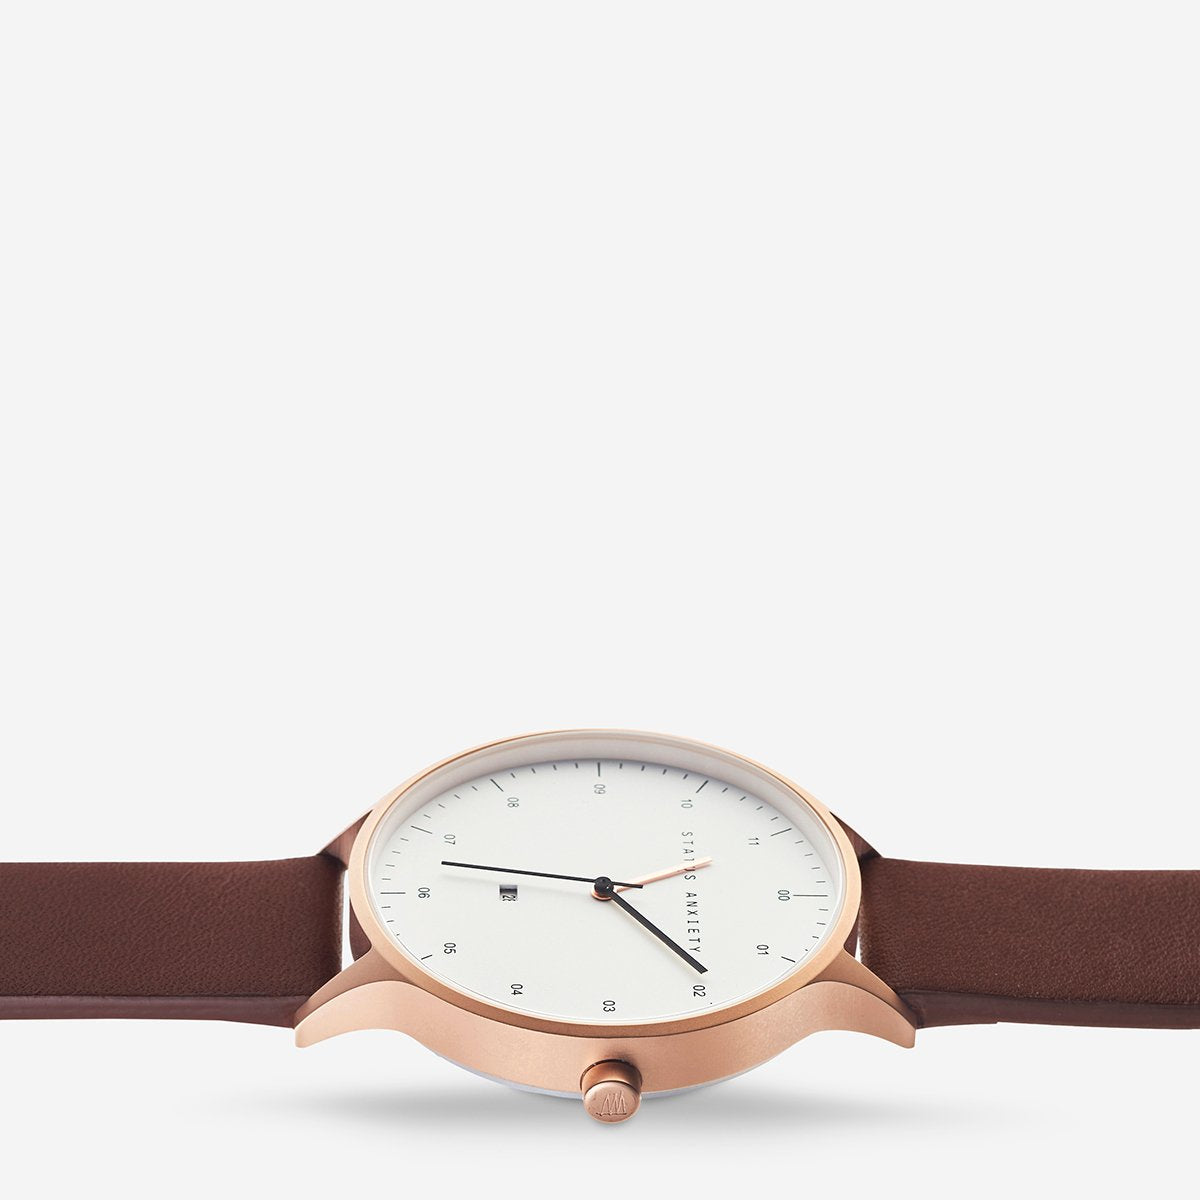 Watch Inertia Brushed Copper / White Face / Brown Strap